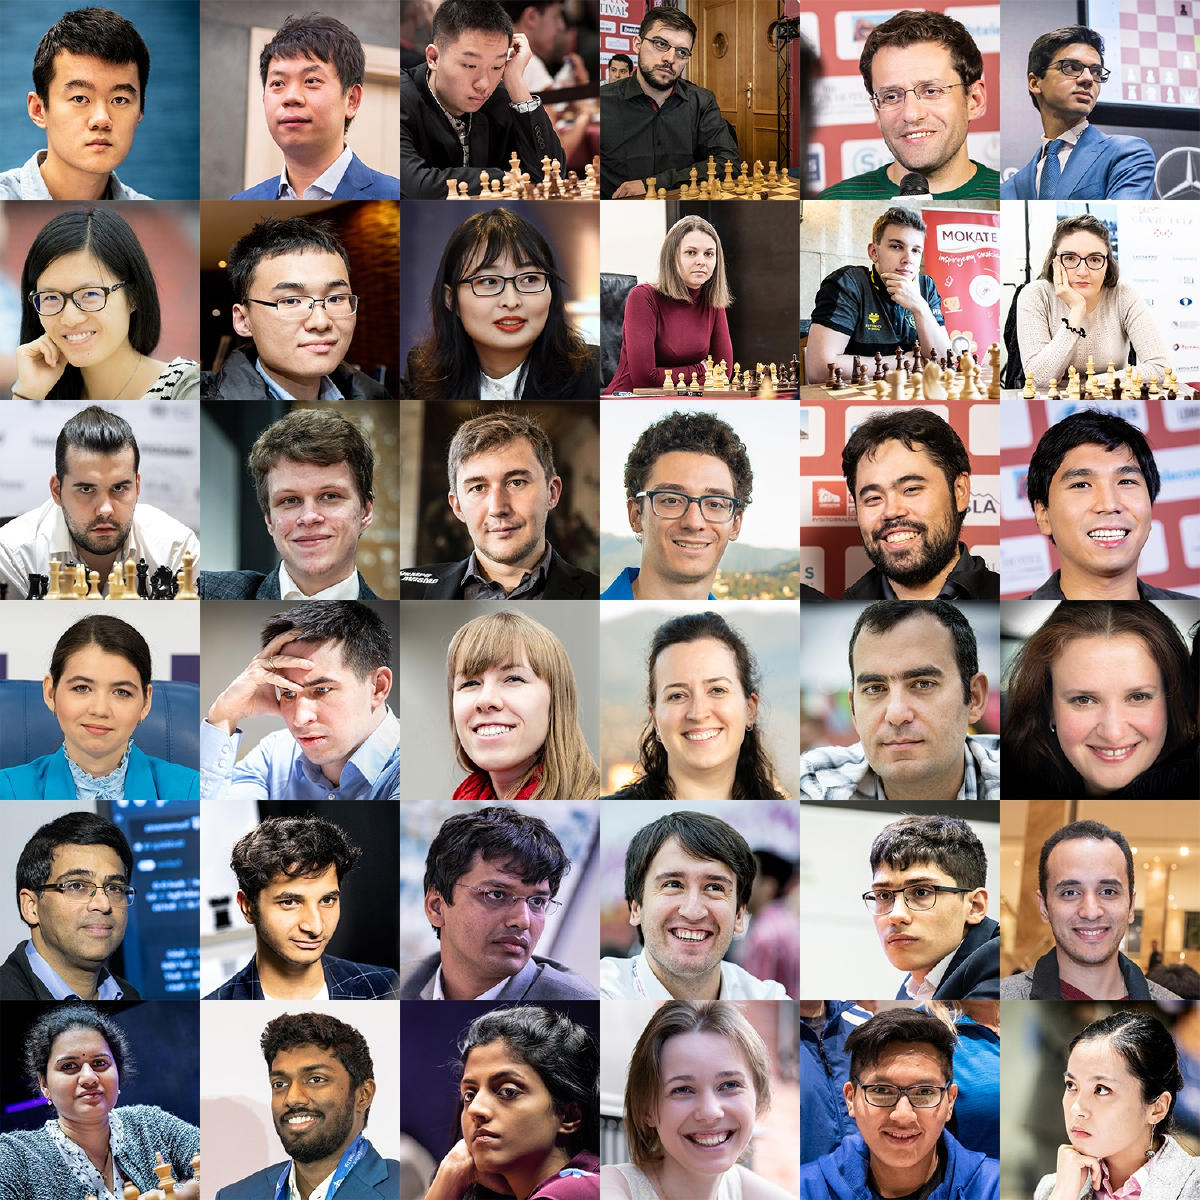 Here are all 36 participants of FIDE